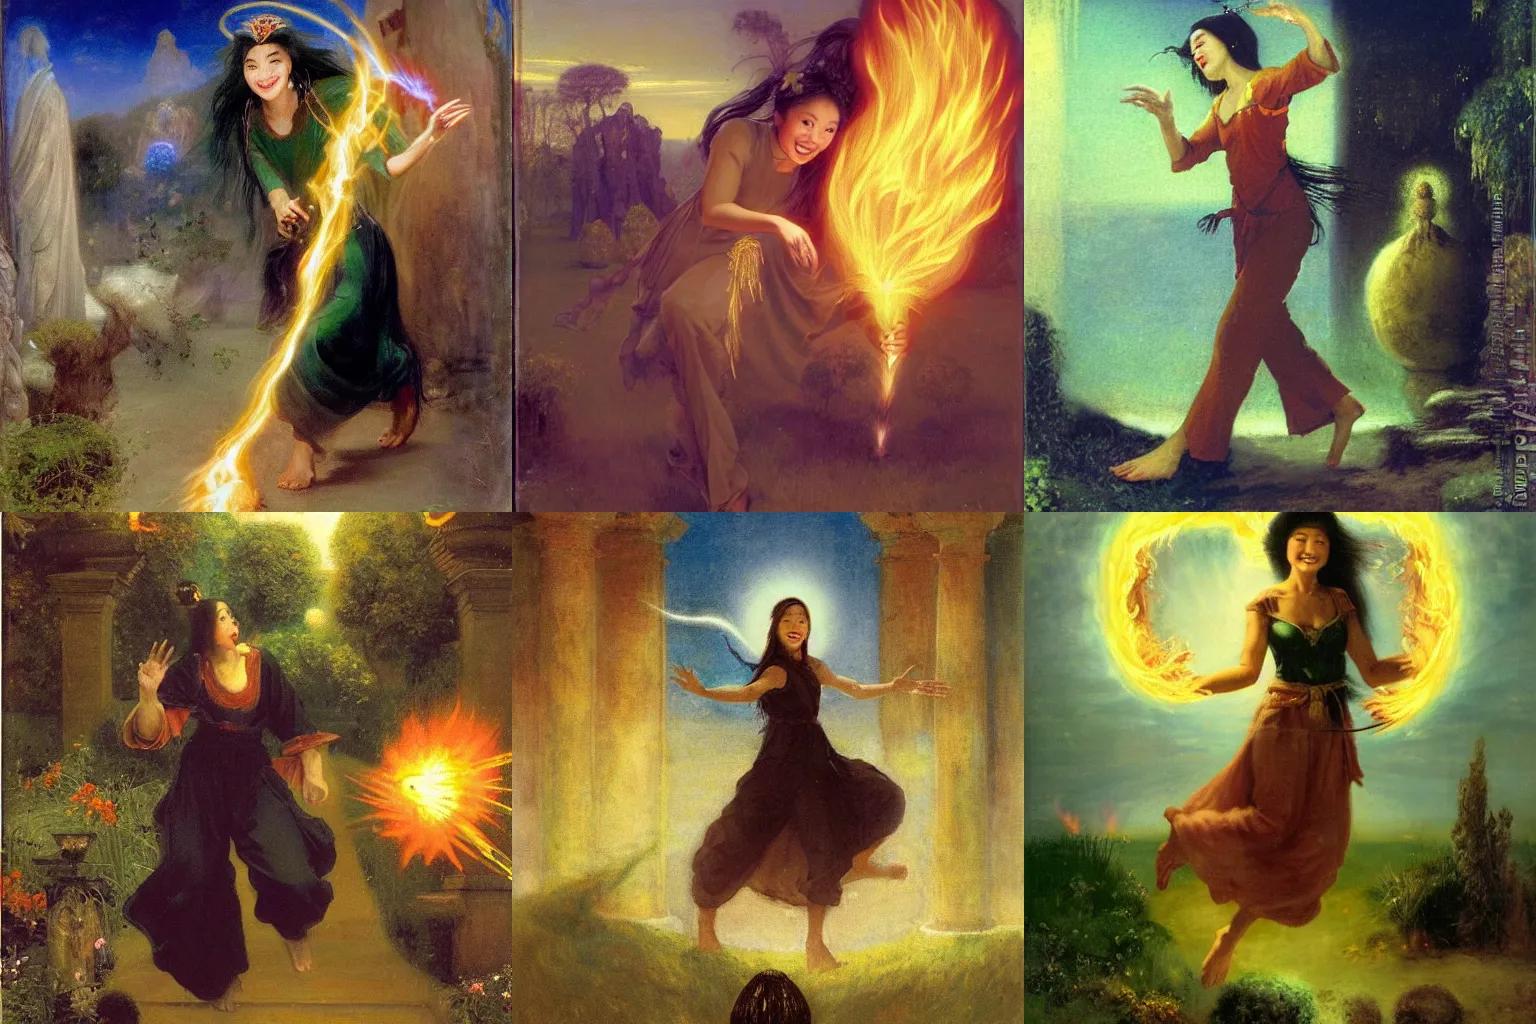 Prompt: smiling hapa sorceress in trousers wearing trousers casting a fireball and chasing will-o-wisps in a garden, orthodox saint, by Arnold Böcklin, breathtaking digital 2d cover art